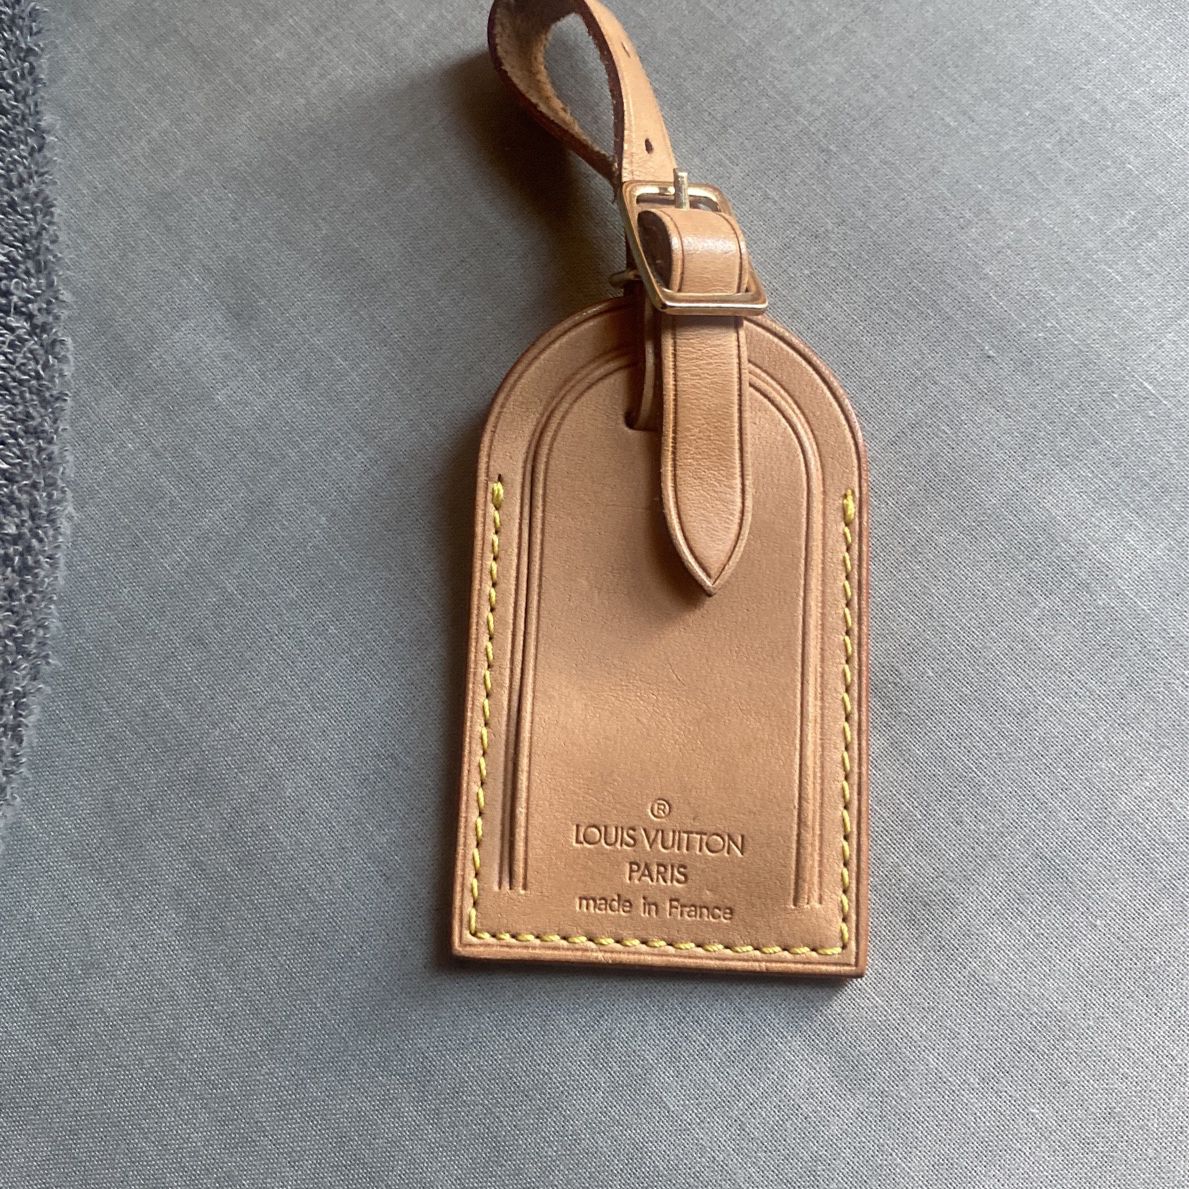 Custom Painted lV Luggage Tag With Charms for Sale in Palmdale, CA - OfferUp